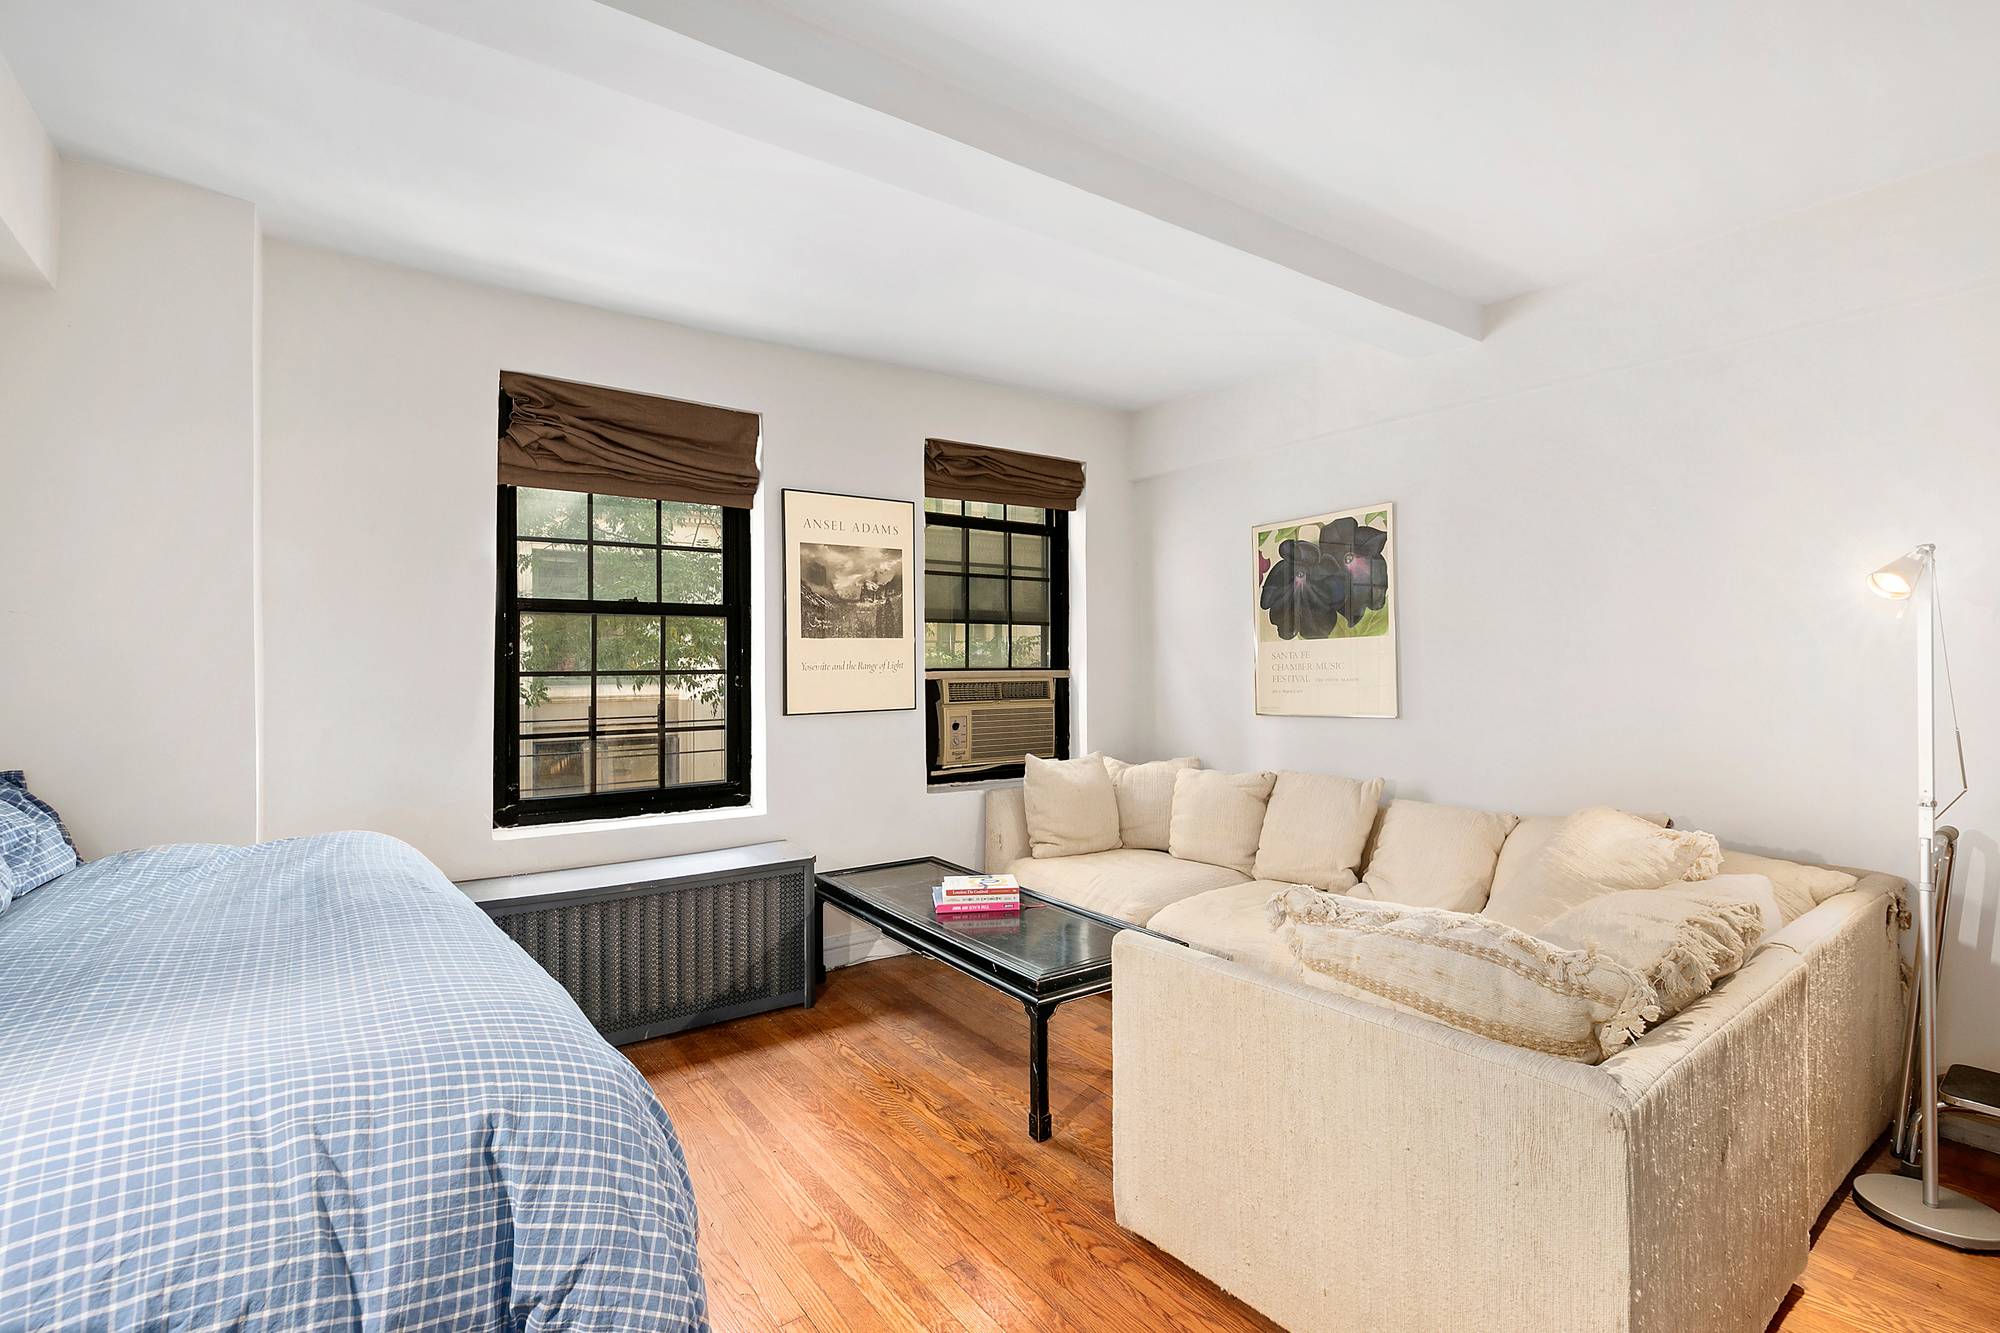 Located in one of the best neighborhoods in Manhattan, this charming and quiet one bedroom co op apartment is your oasis in the city.